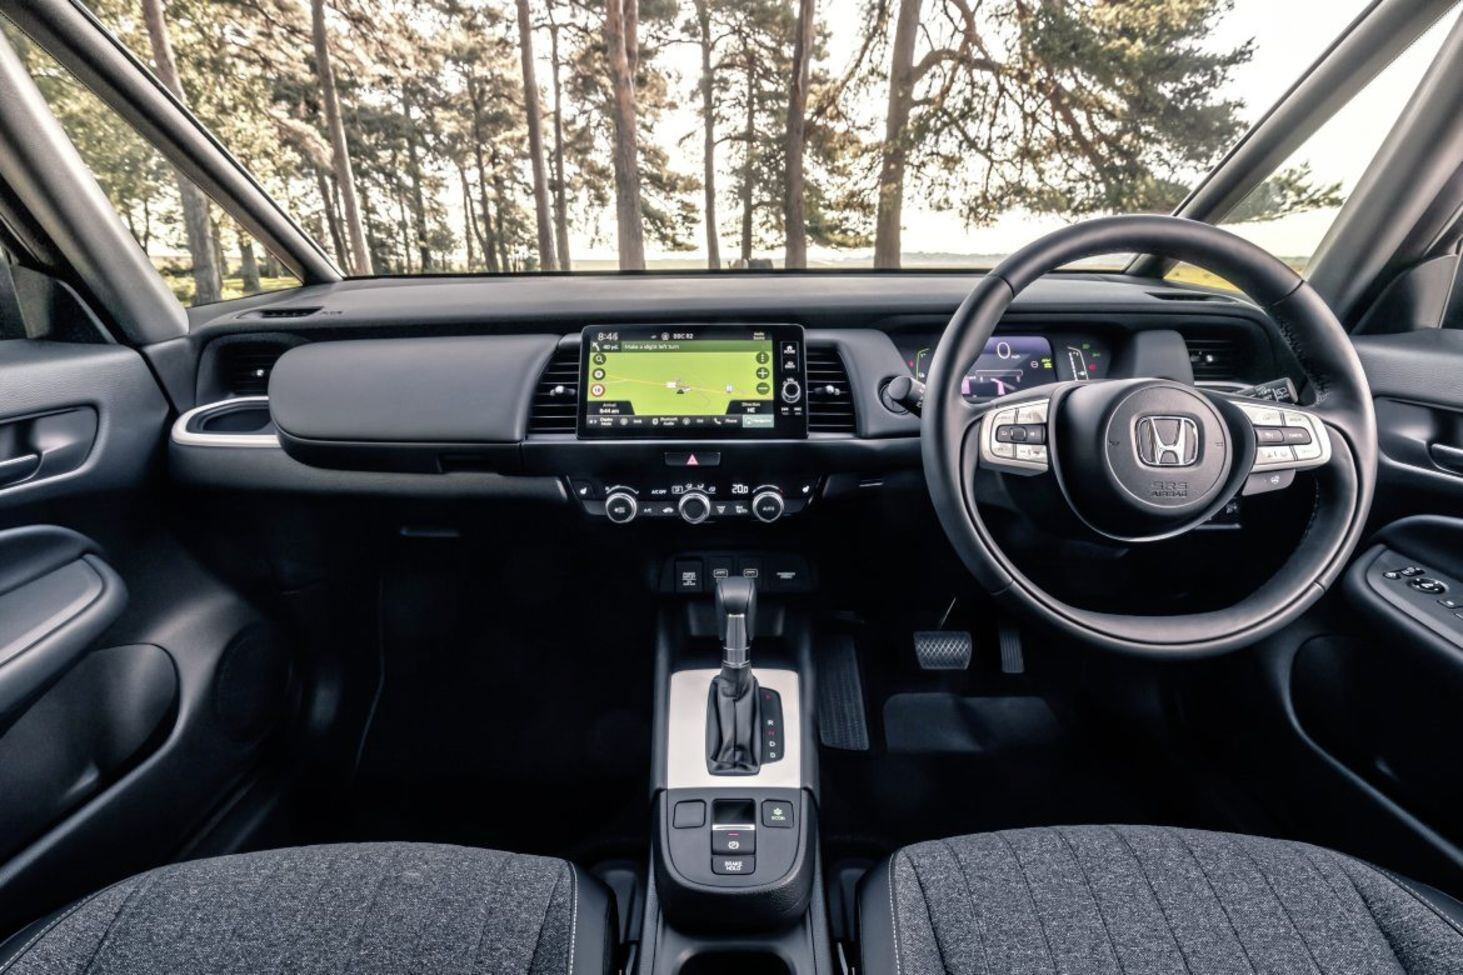 The Honda ZR-V is a brilliant family SUV with a clever hybrid